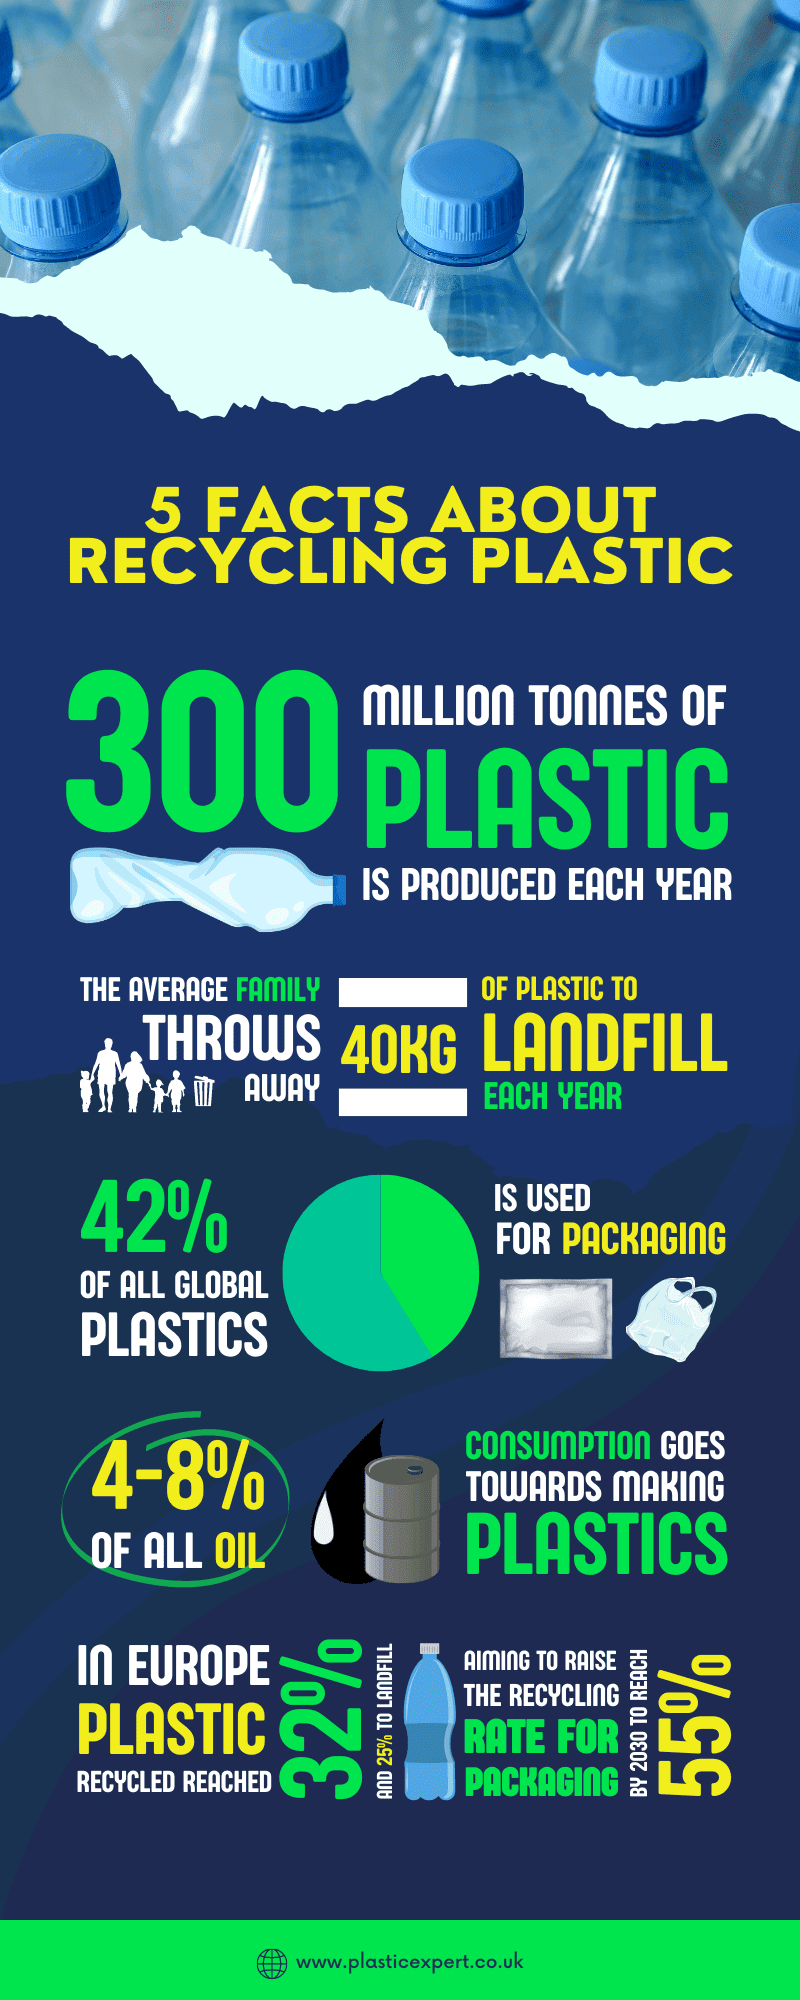 plastic recycling facts infographic